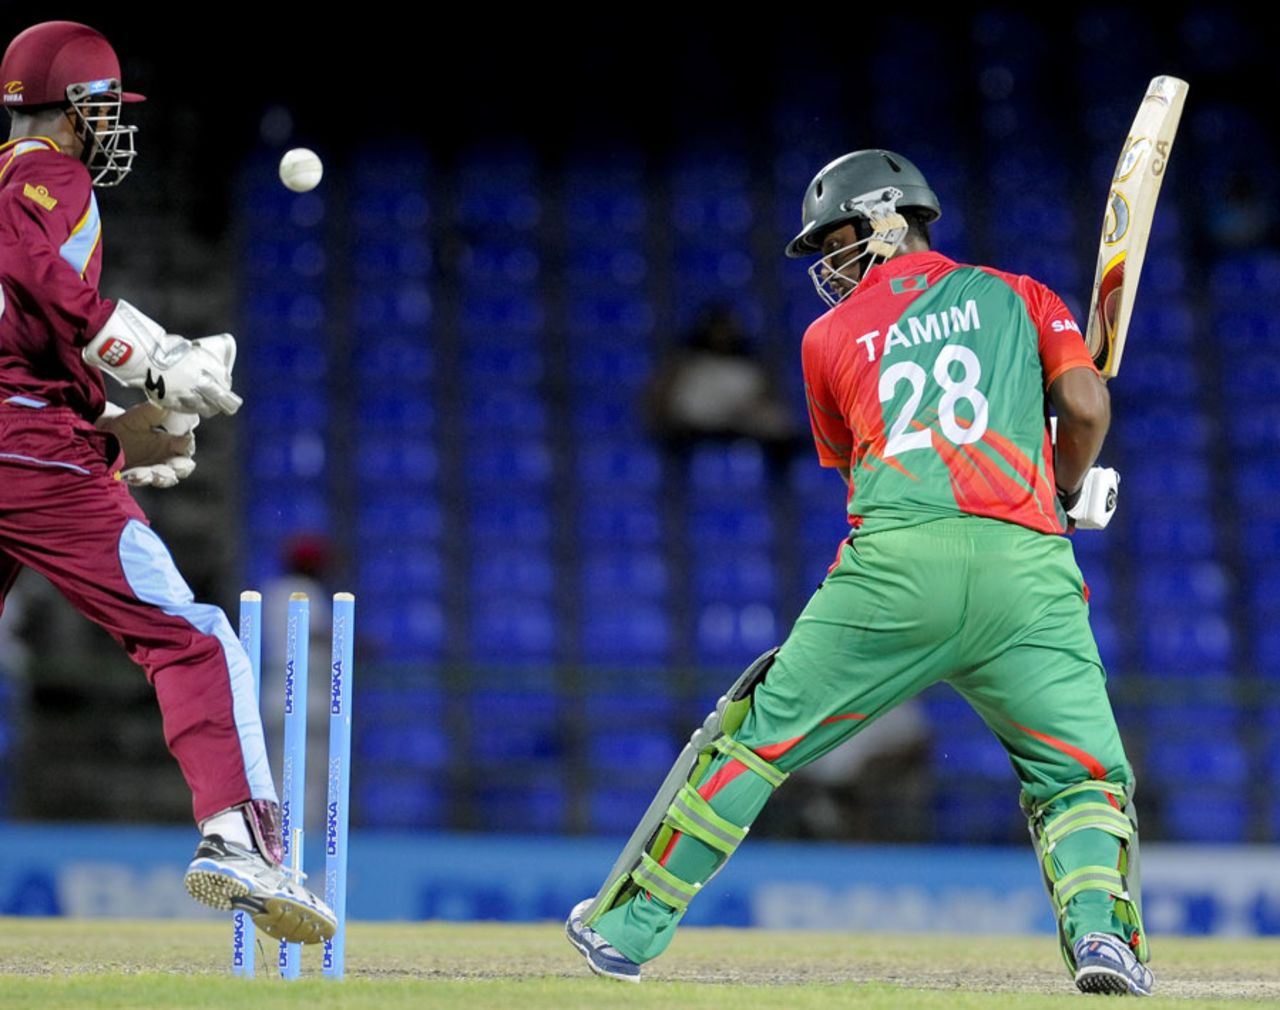 Tamim Iqbal was bowled by Sunil Narine for 55, West Indies v Bangladesh, 3rd ODI, Basseterre, St Kitts, August 25, 2014